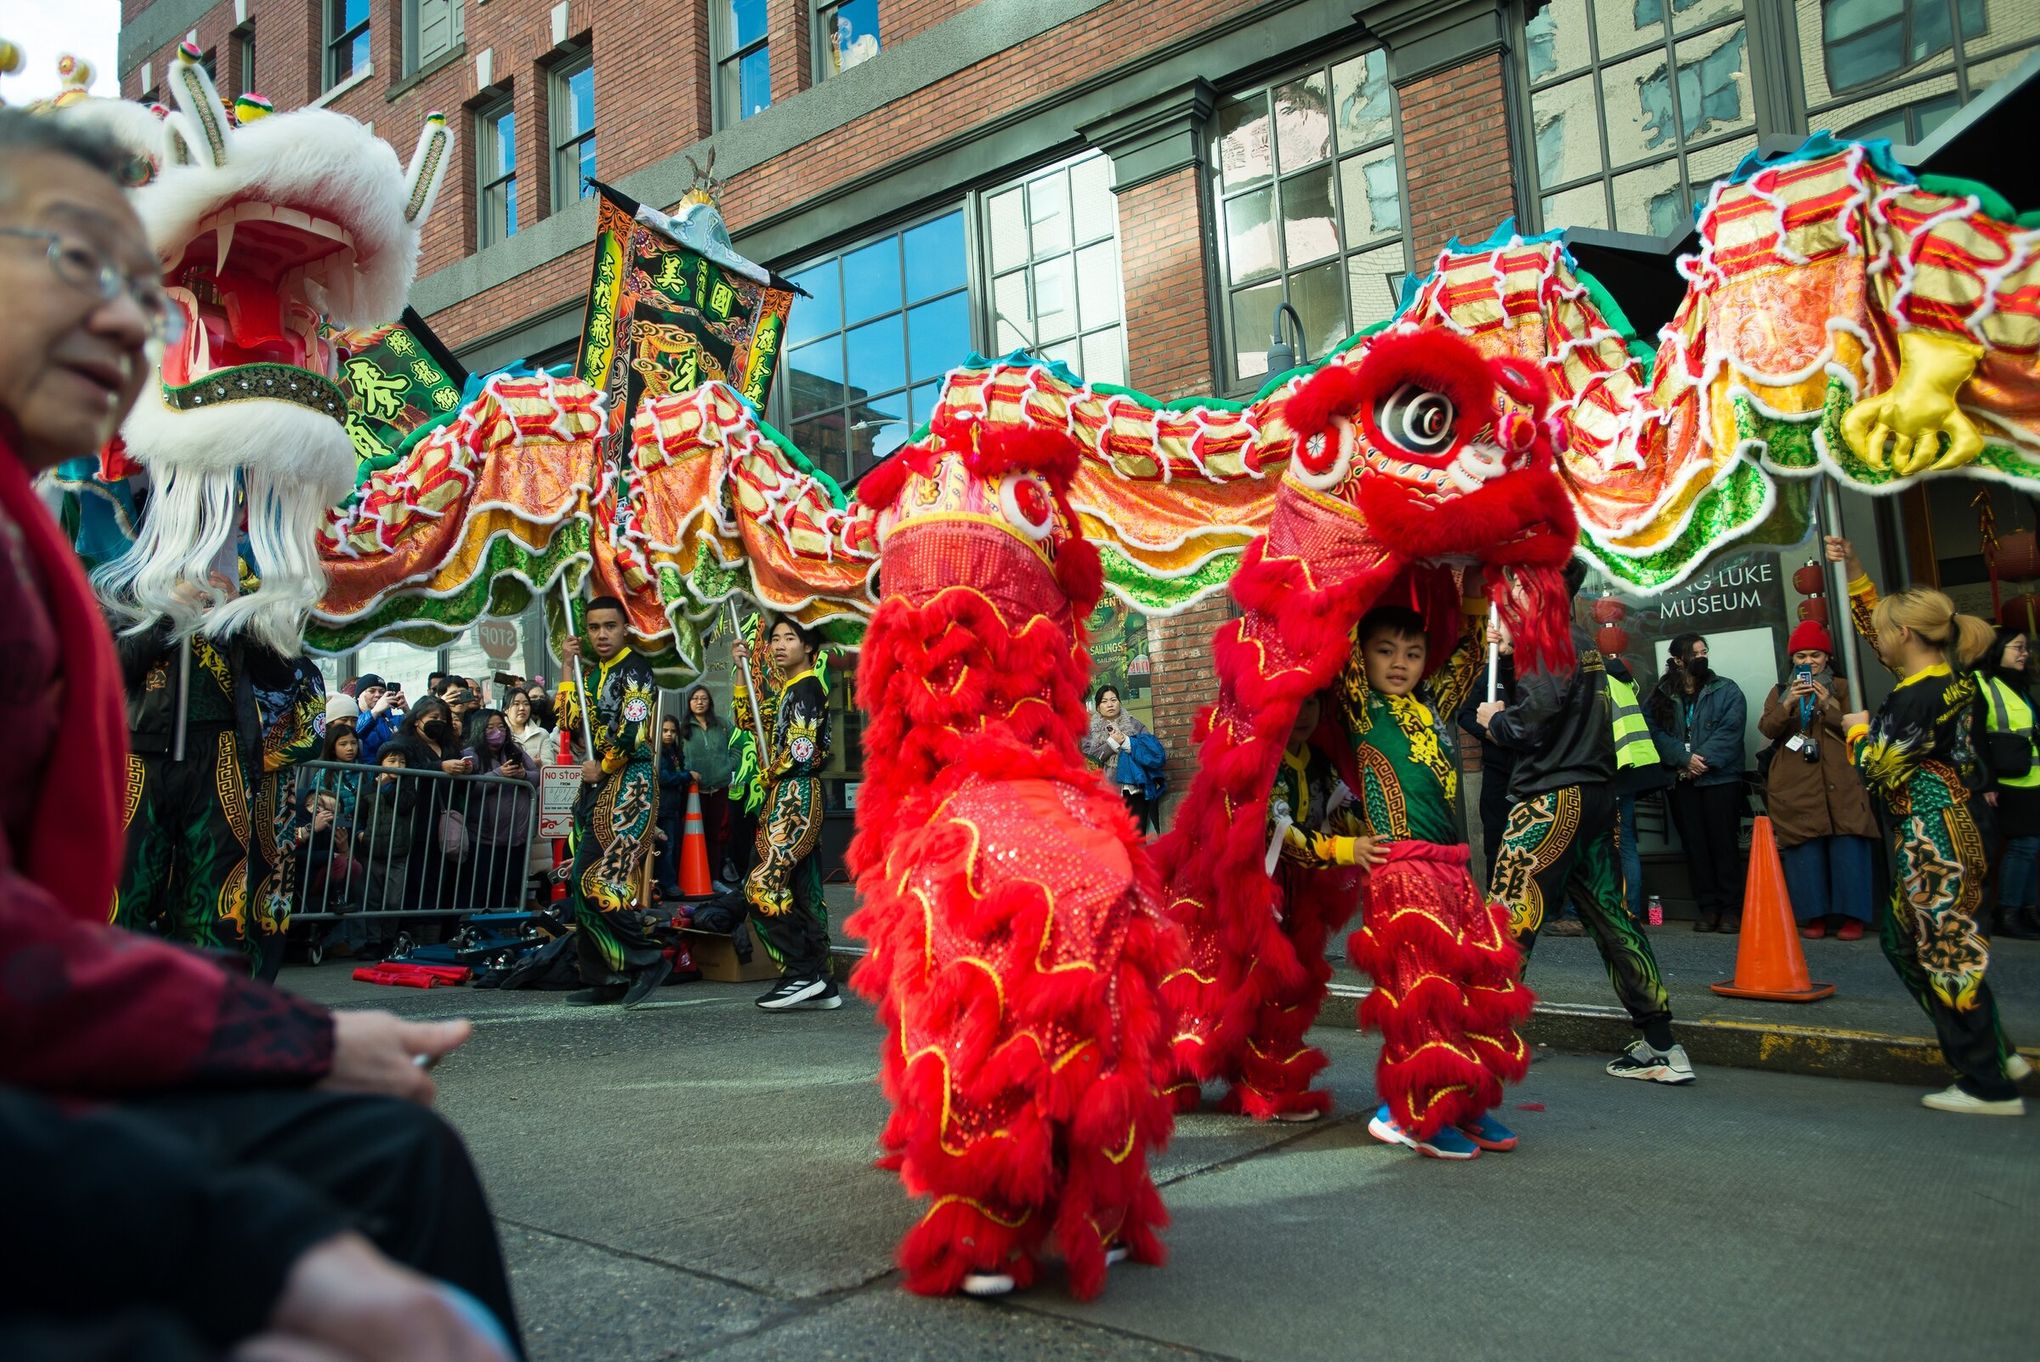 When is Lunar New Year 2024 and how is it celebrated? Find out